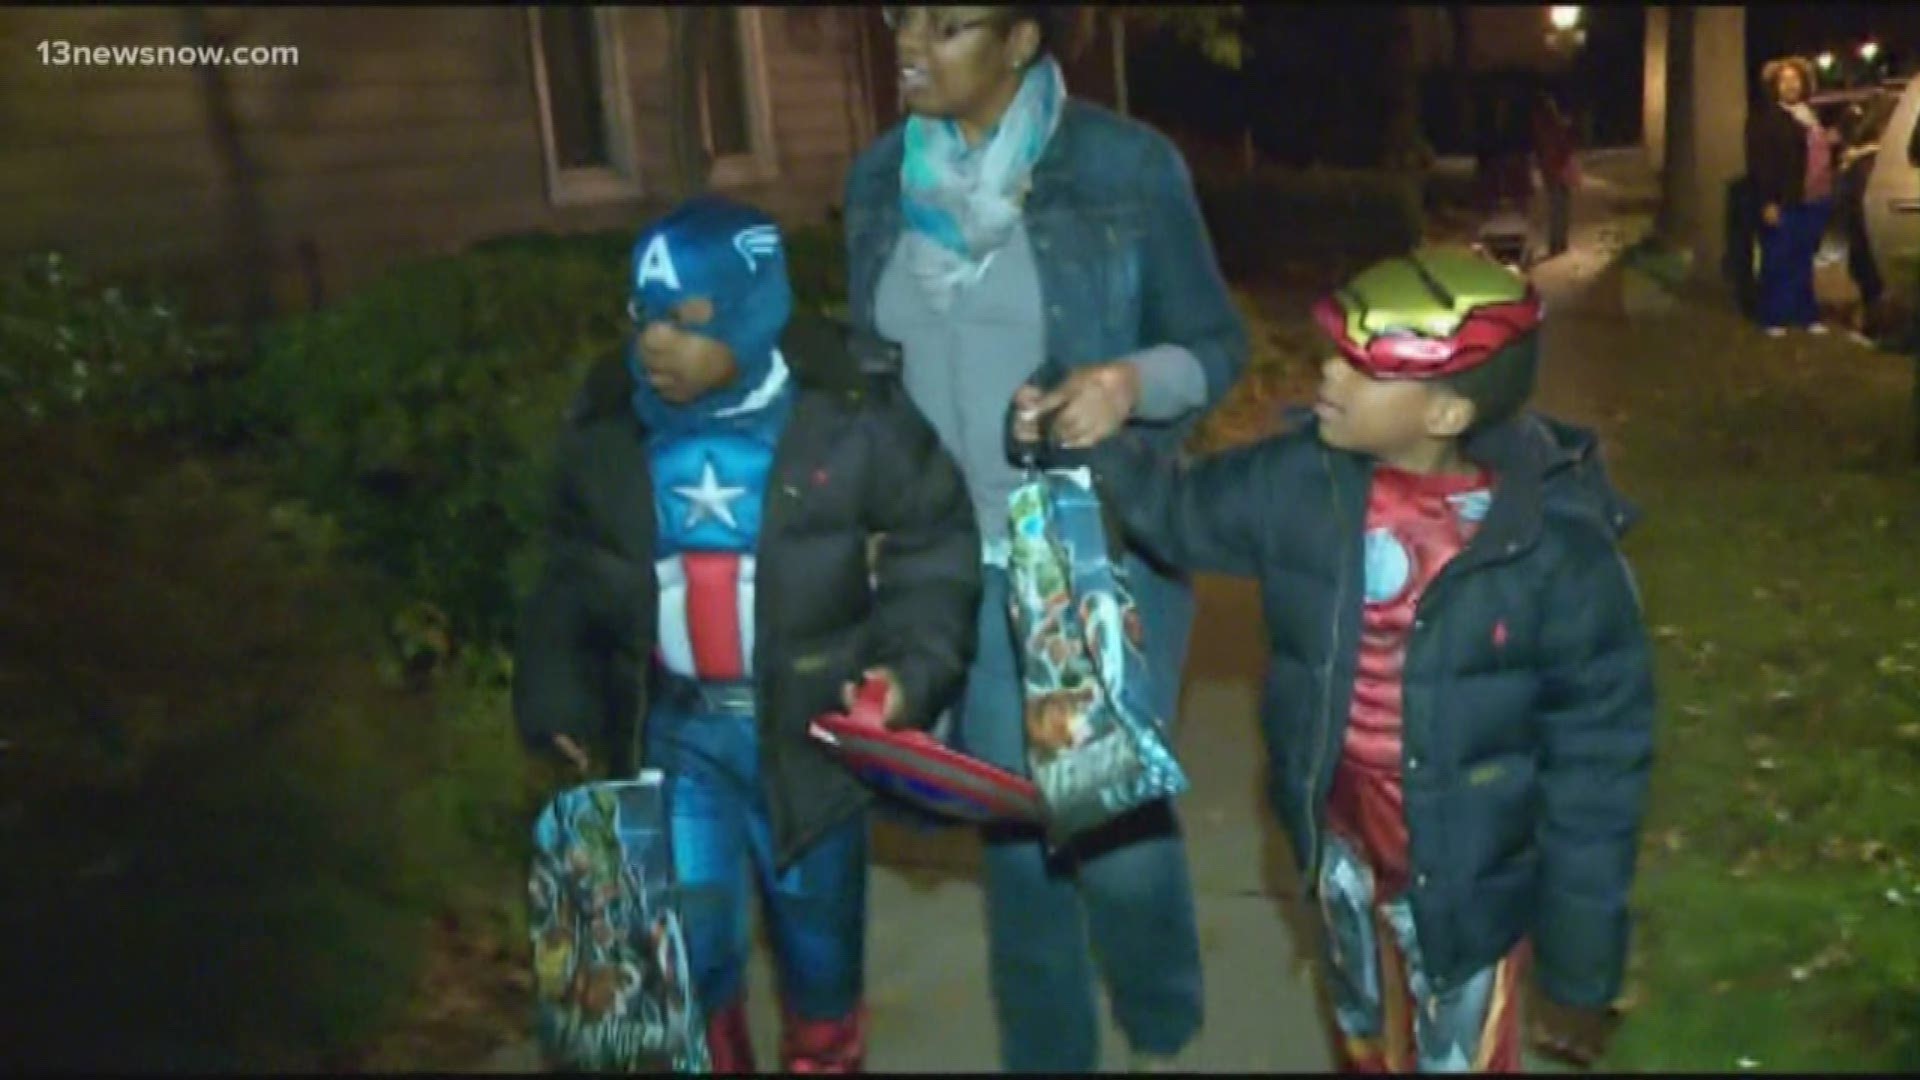 Will trick-or-treaters over the age of 12 face jail time in Chesapeake? Chesapeake city council raised the age to 14. The law is there for people causing problems.